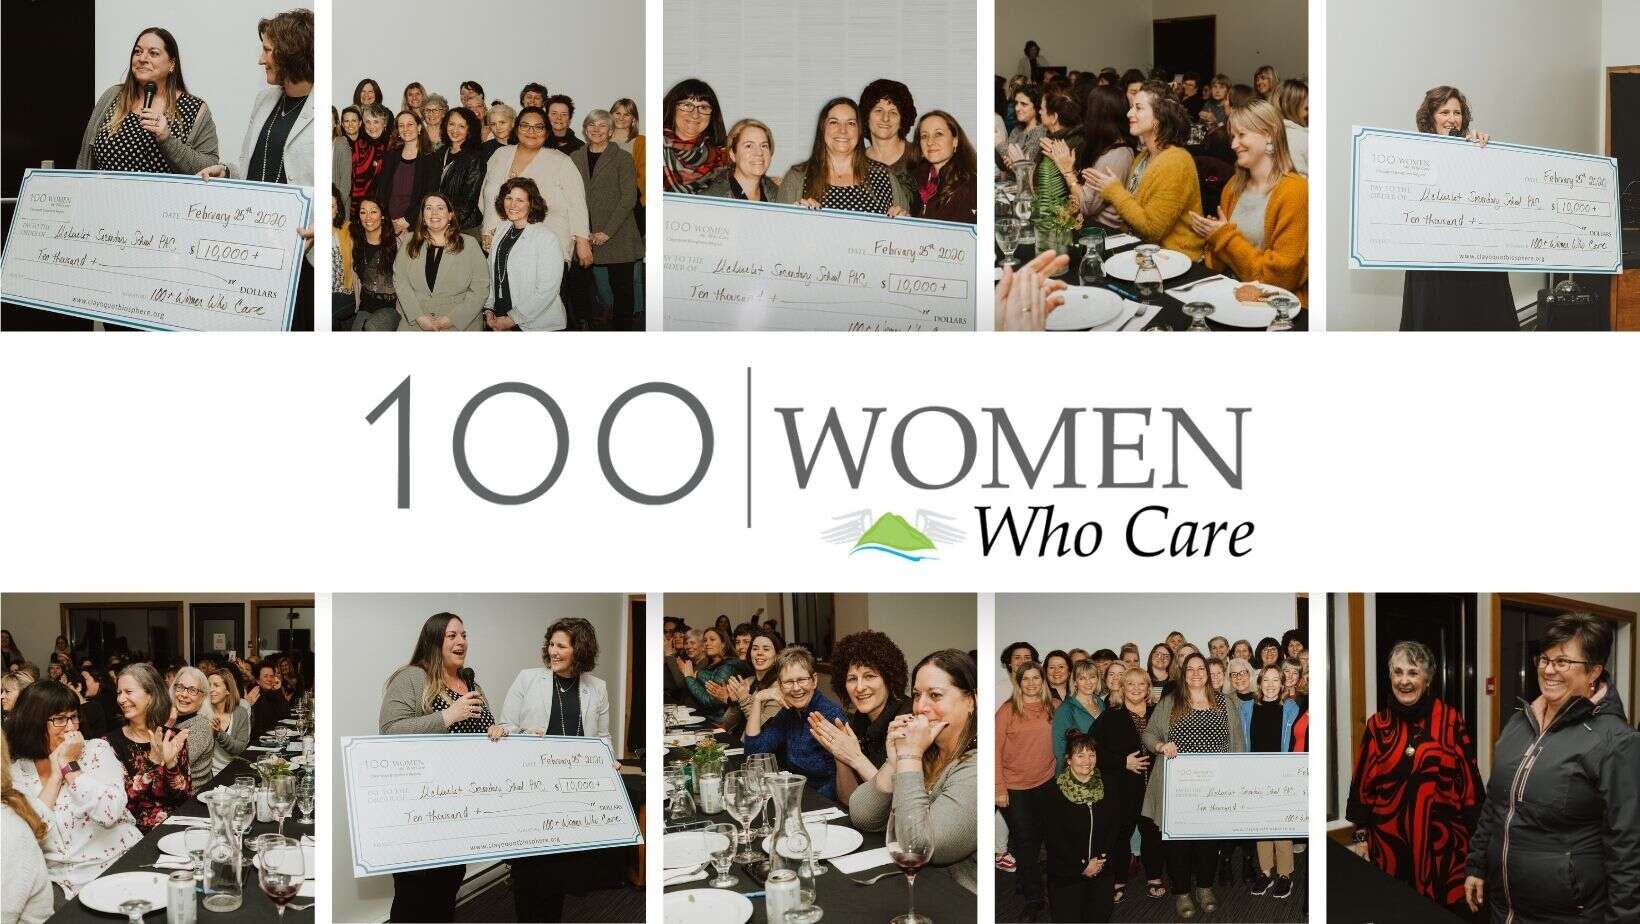 100 Women Who Care Event Clayoquot Biosphere Trust